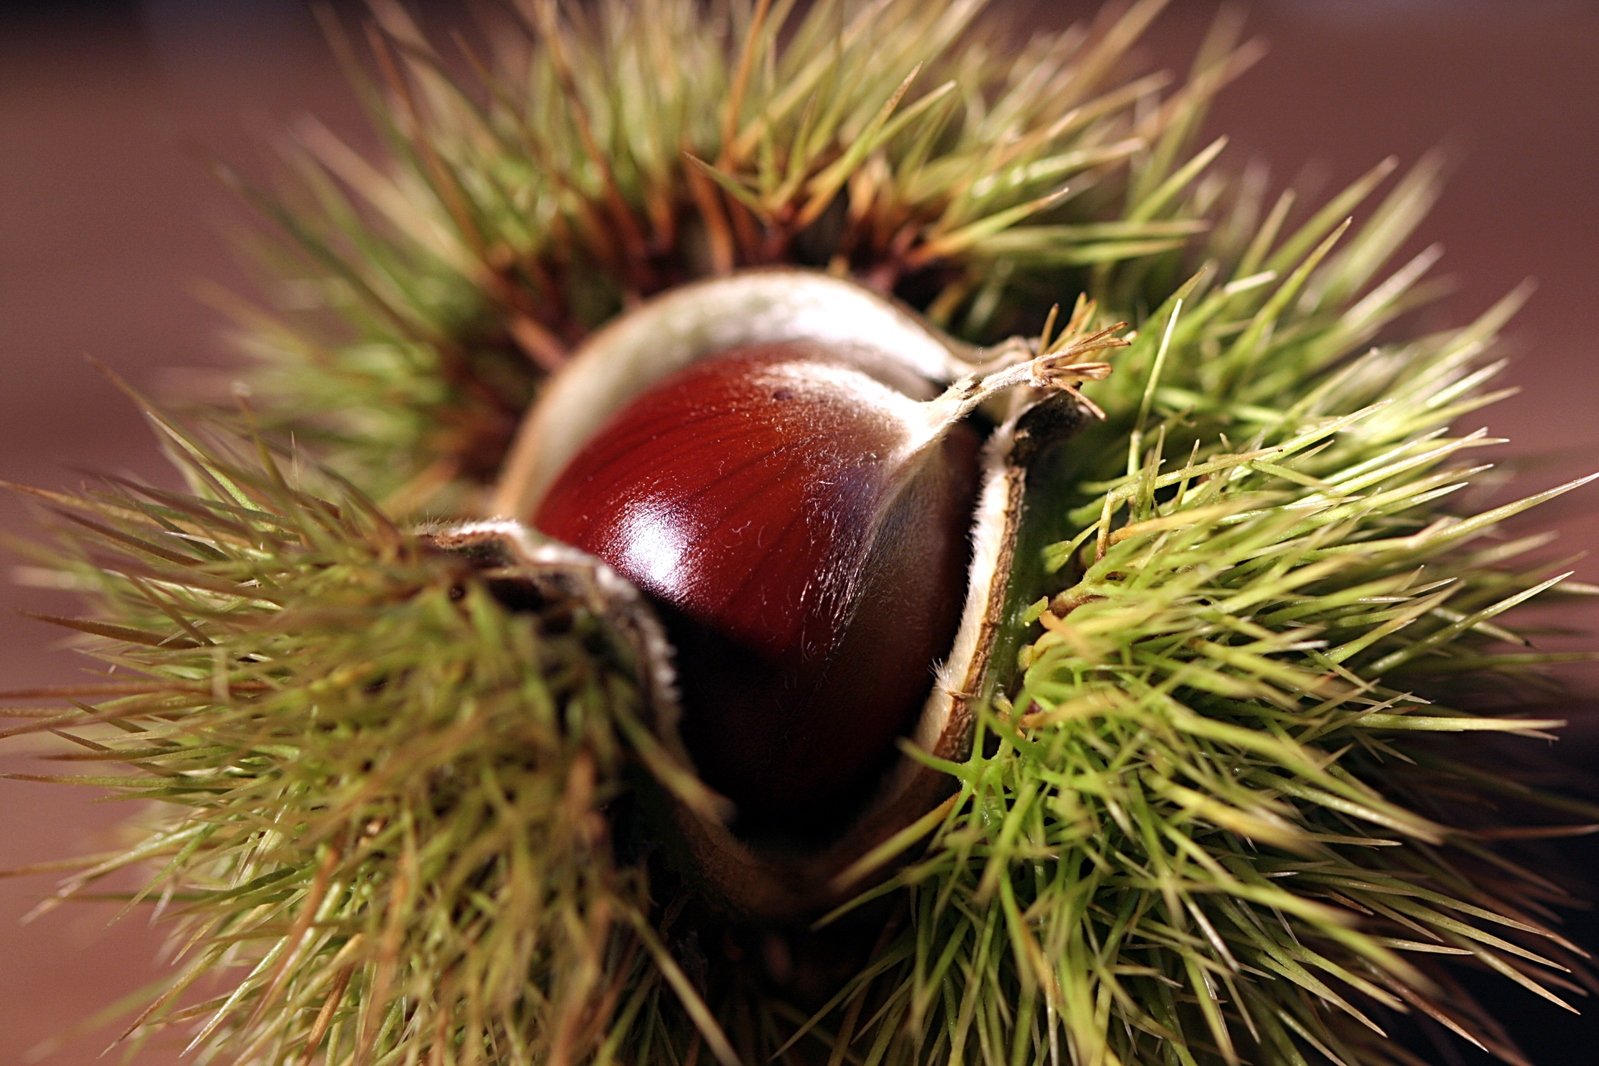 an acorn is shown with tiny green needles